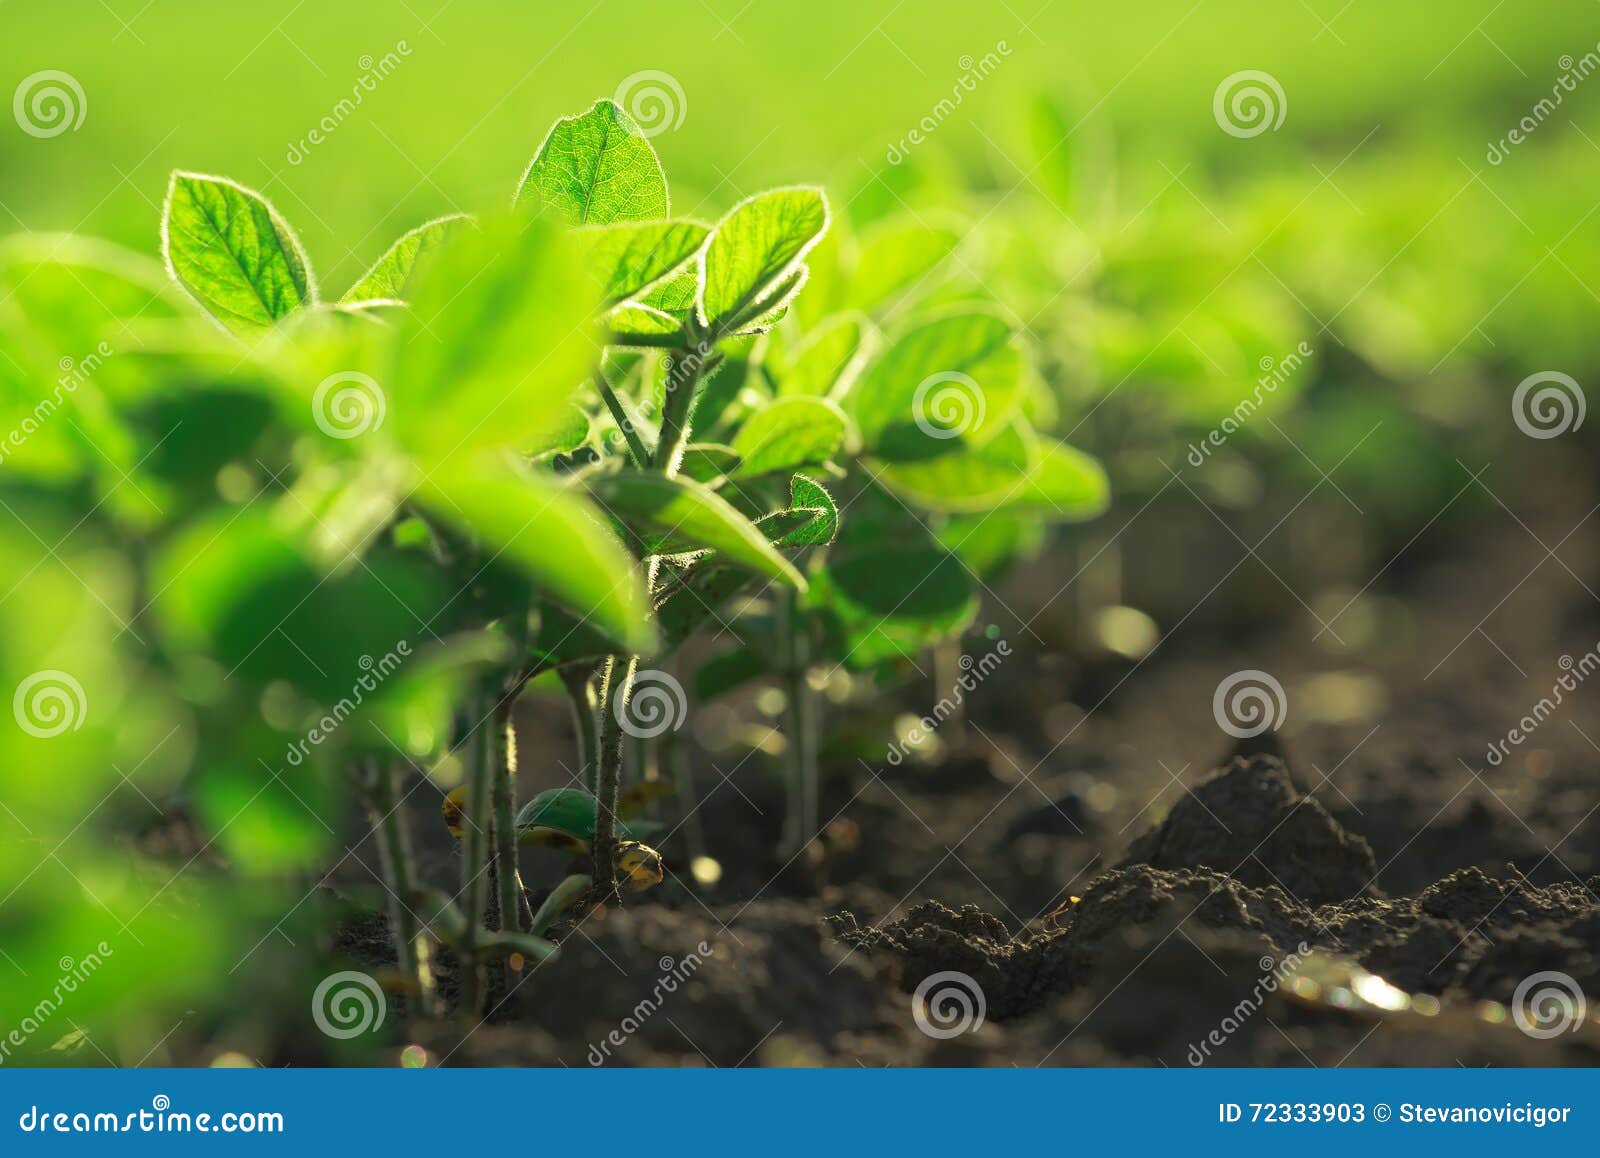 young soybean plants growing in cultivated field